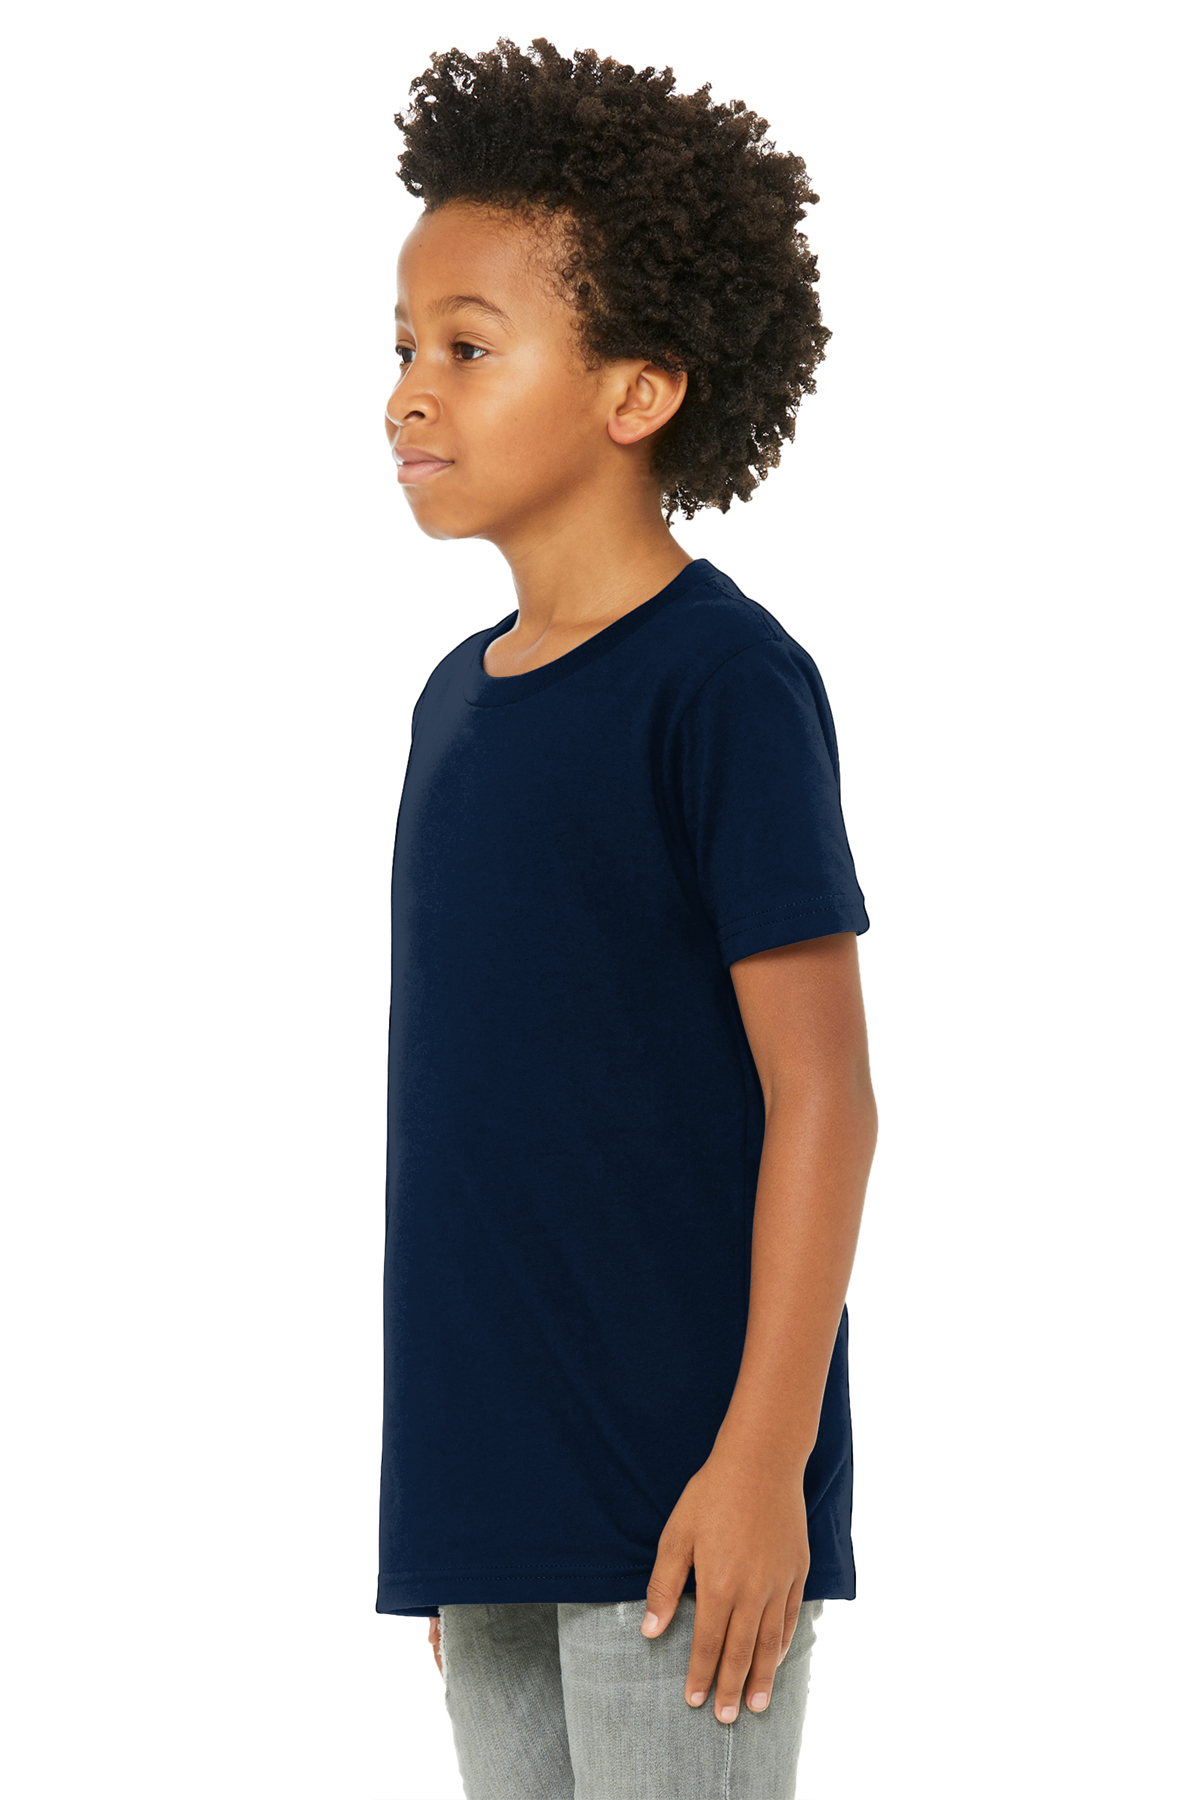 BELLA+CANVAS Youth Jersey Short Sleeve Tee | Product | SanMar